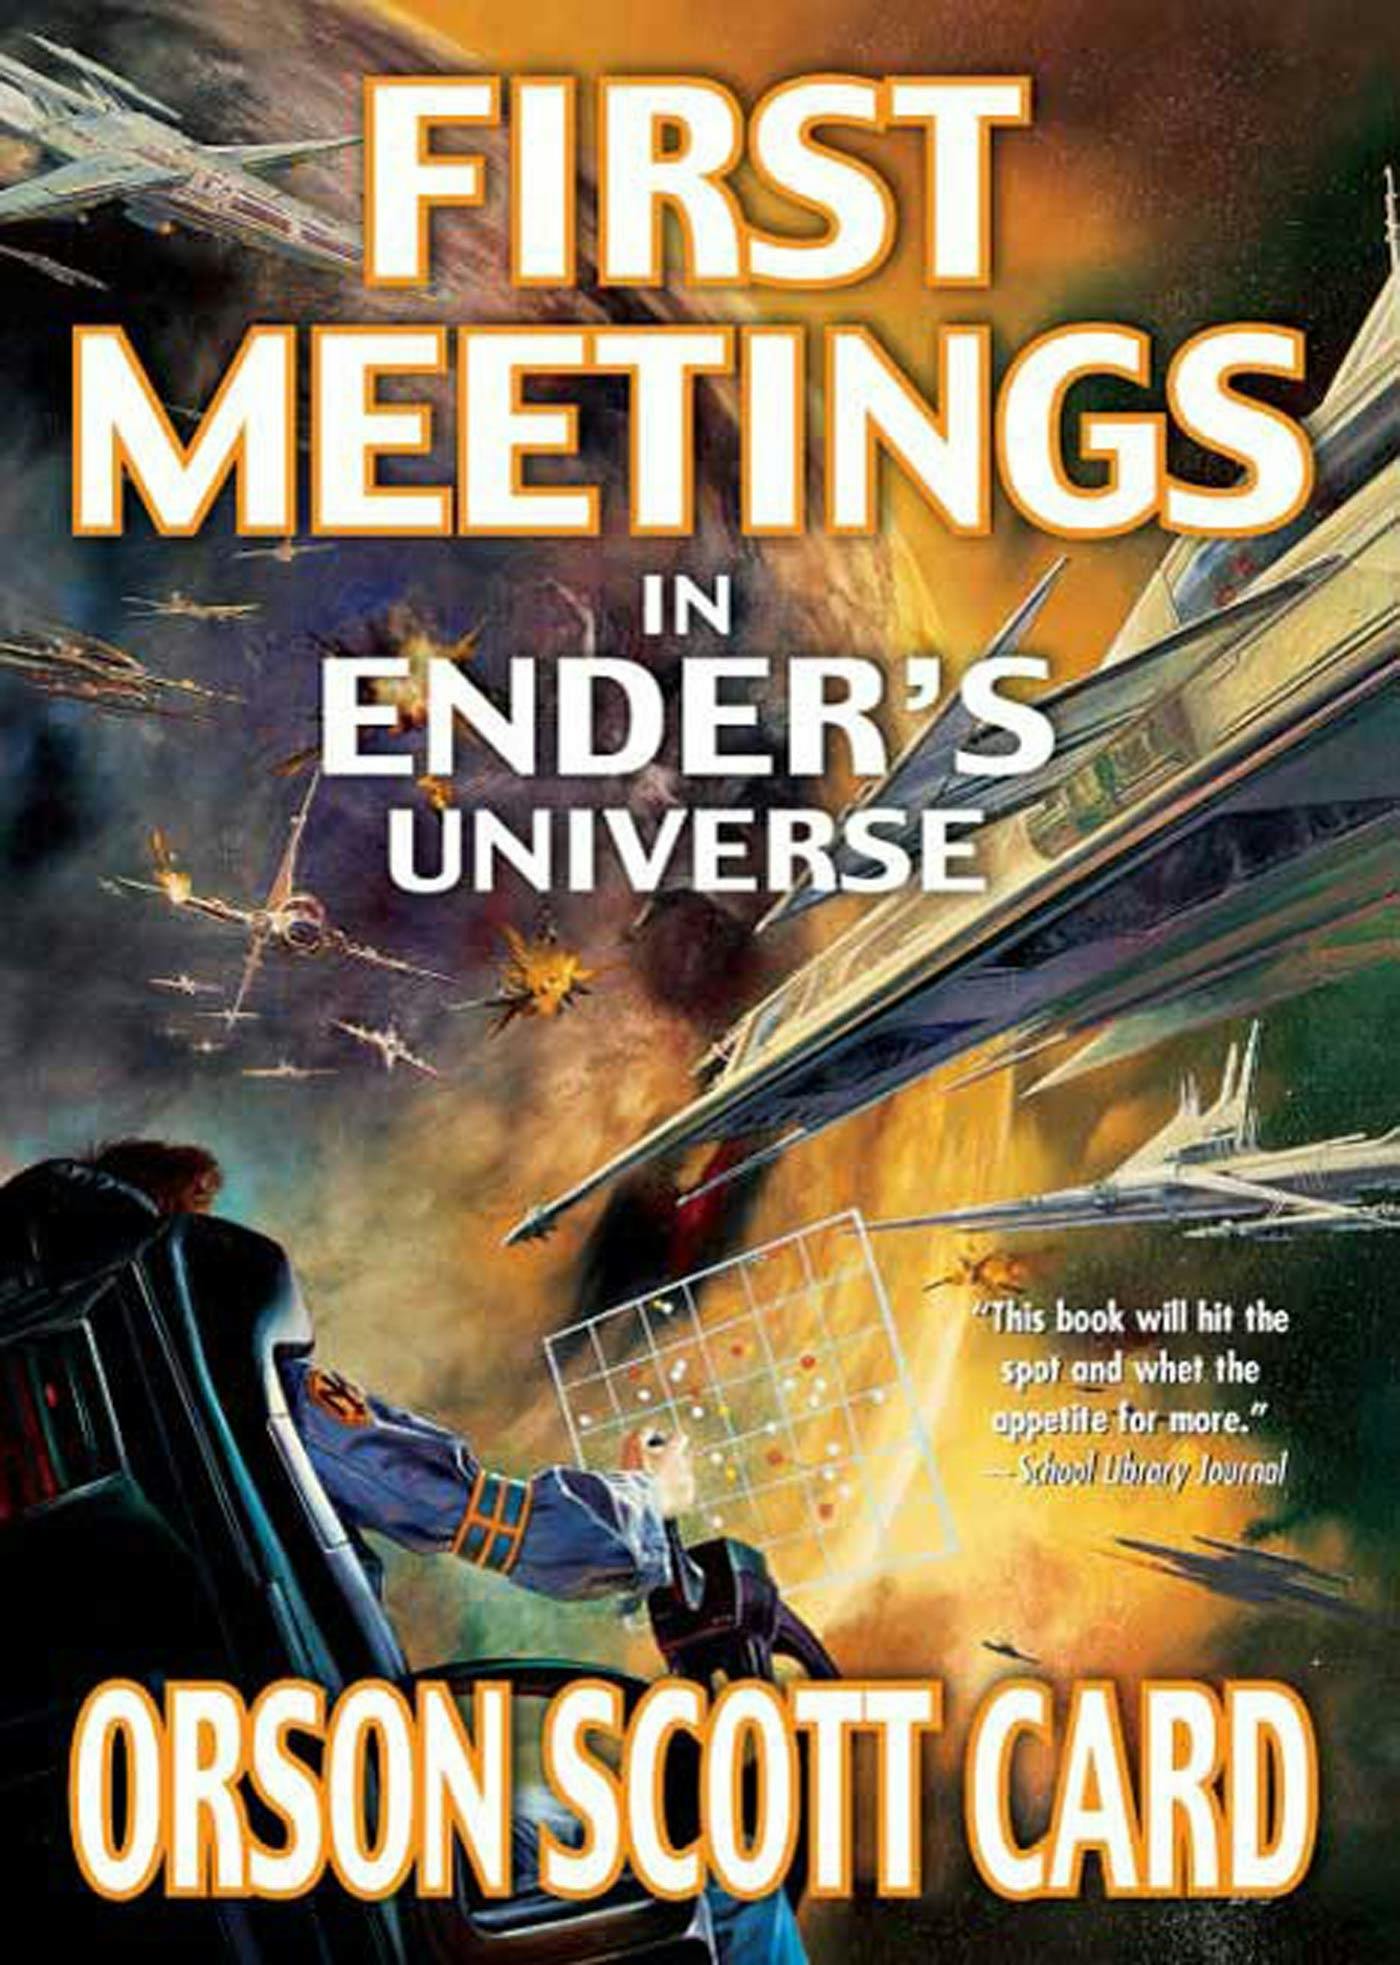 Image of First Meetings